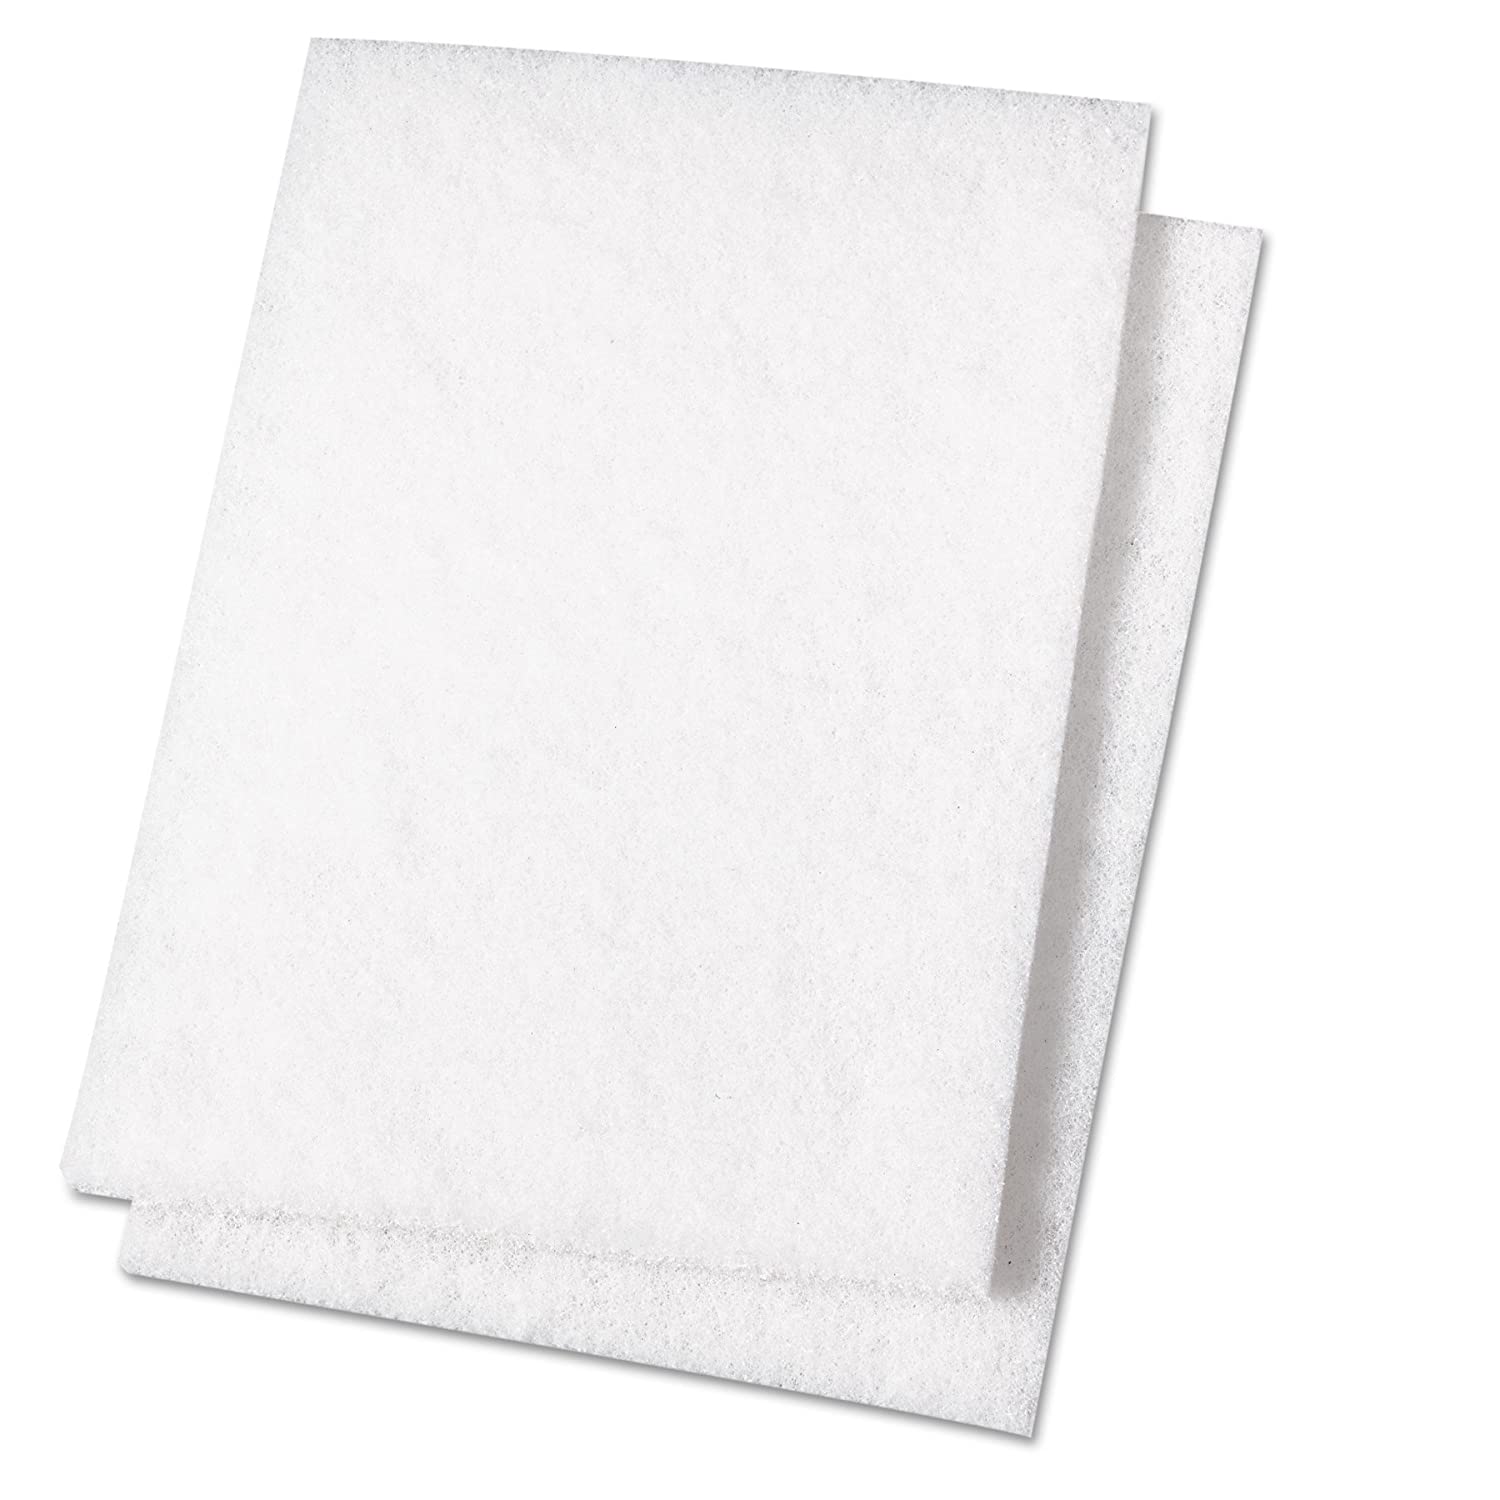 '''Premiere Pads PAD 198 Light Duty Scouring Pad\ 9'''' Length by 6'''' Width\ White (Case of 20)'''